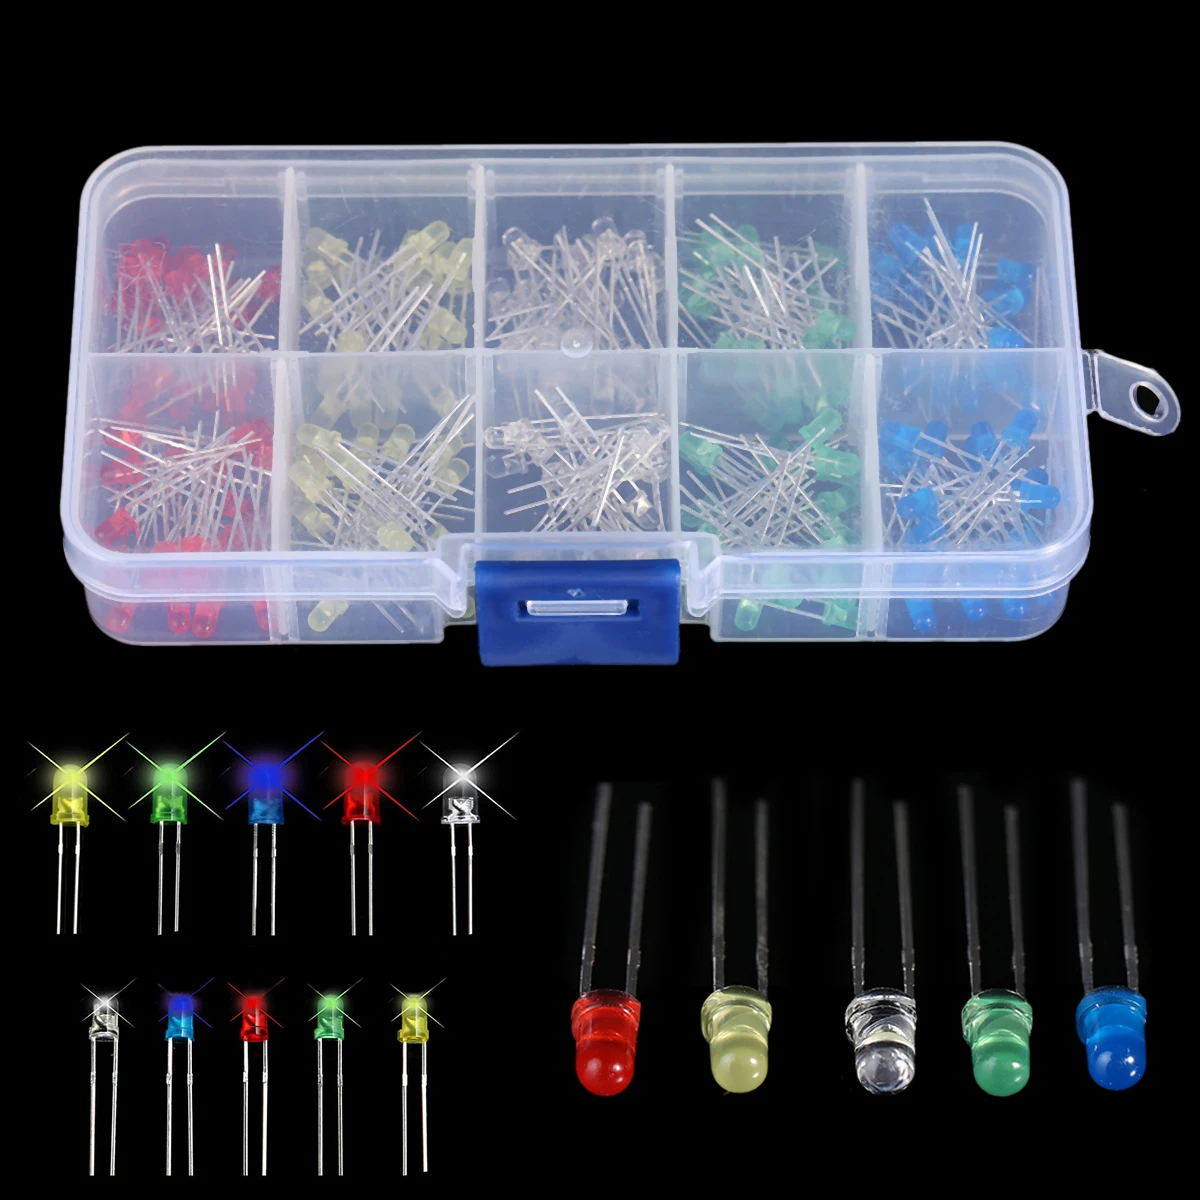 New 150Pcs 3mm 5mm LED Light White Yellow Red Blue Green Assortment Diodes Kit